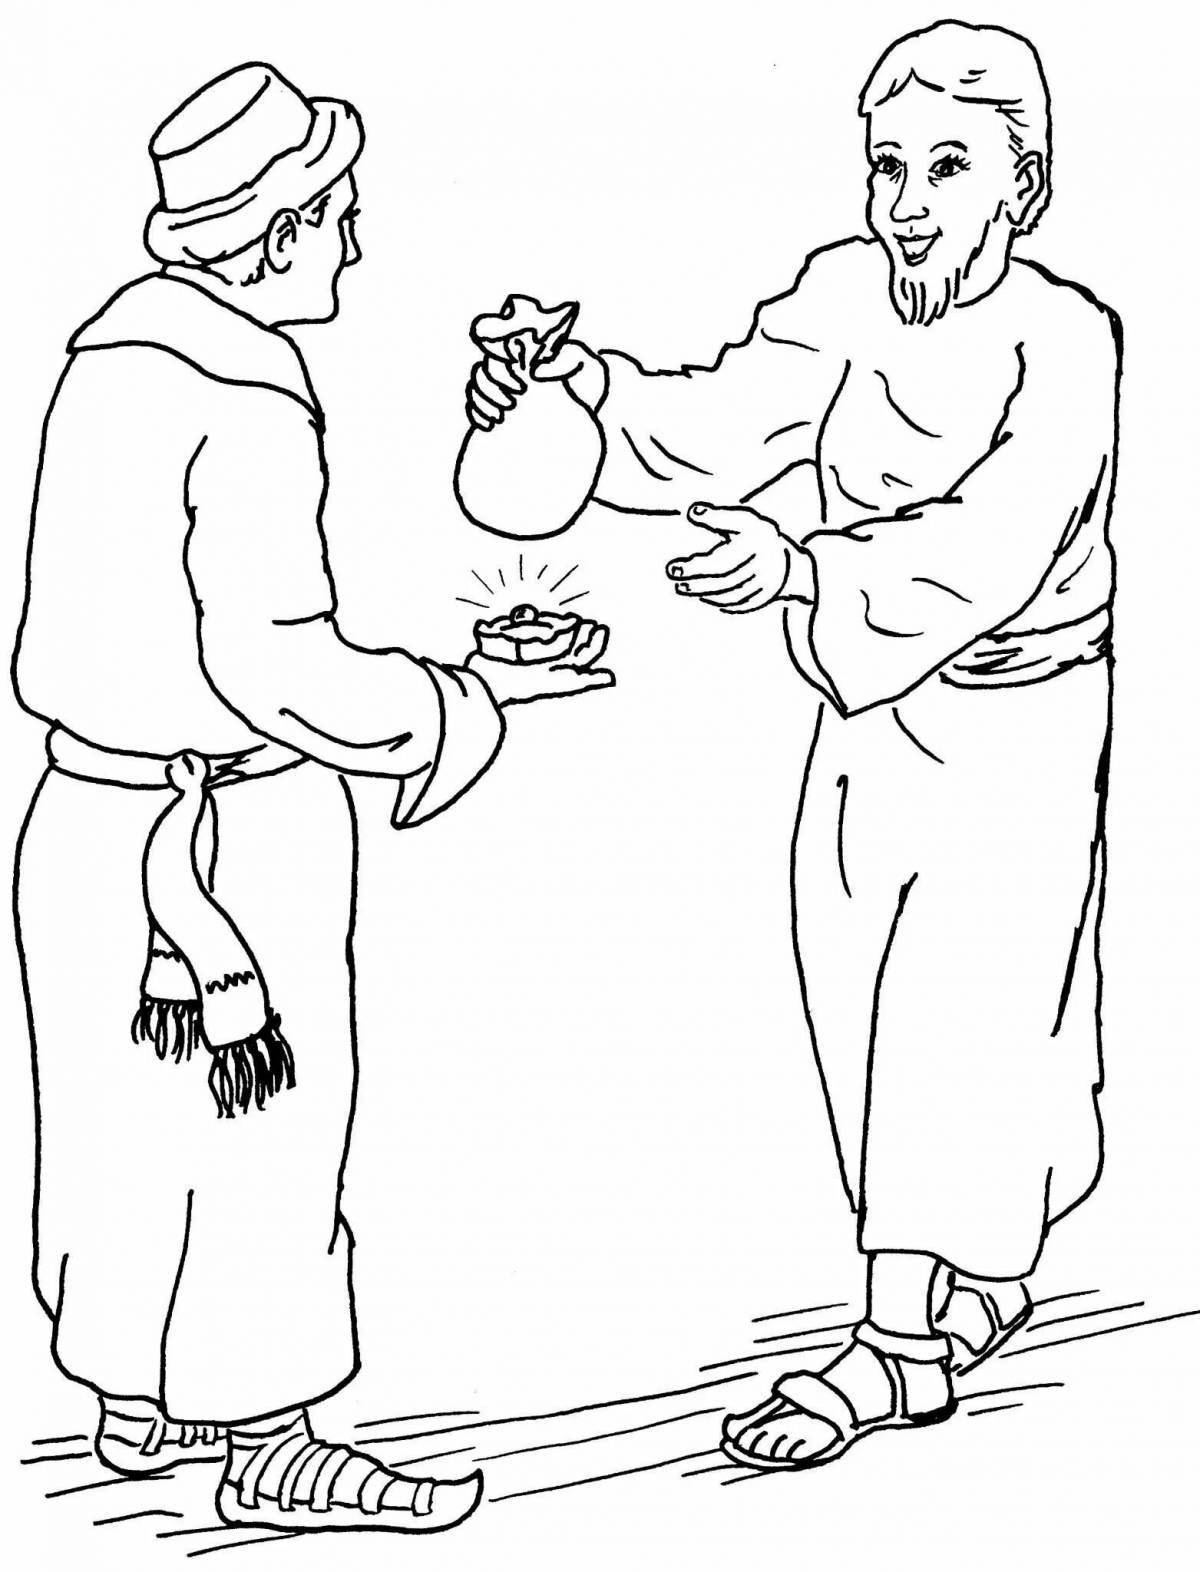 Coloring book creative publican and Pharisee